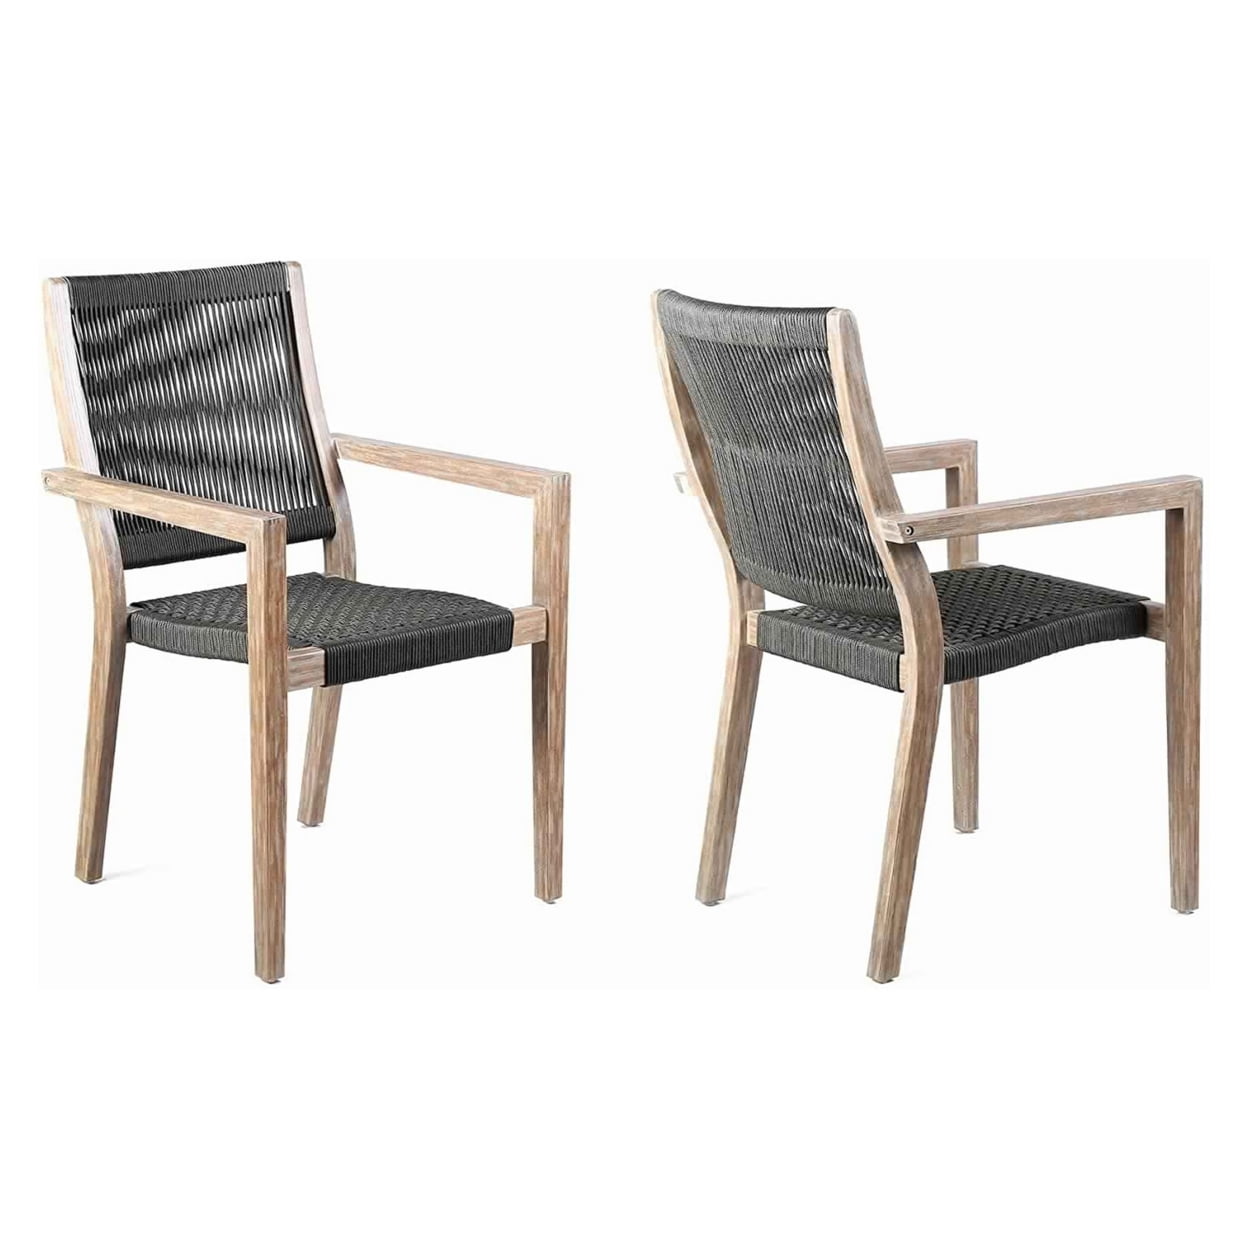 Bm214491 Wooden Outdoor Dining Chair With Fishbone Weave, Charcoal Black - Set Of 2